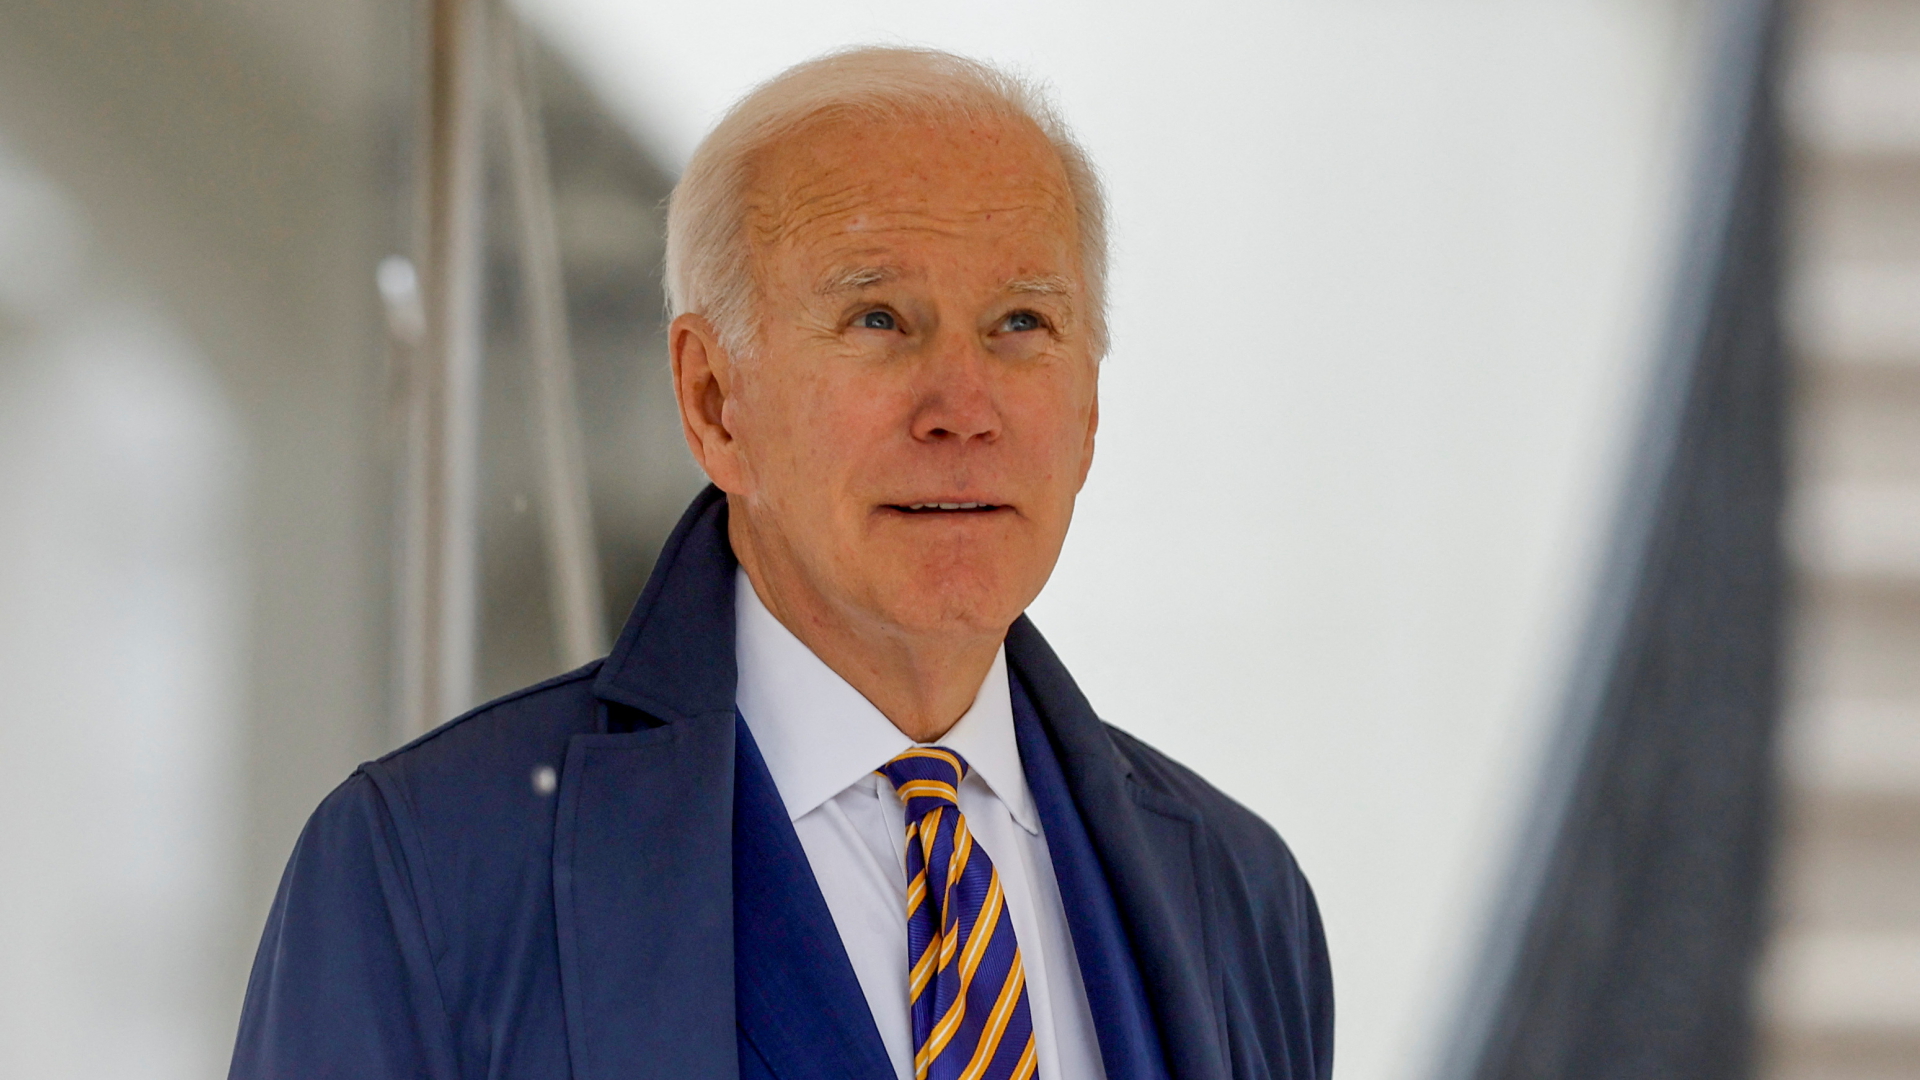 Confidential documents: The FBI searched Biden’s office in November